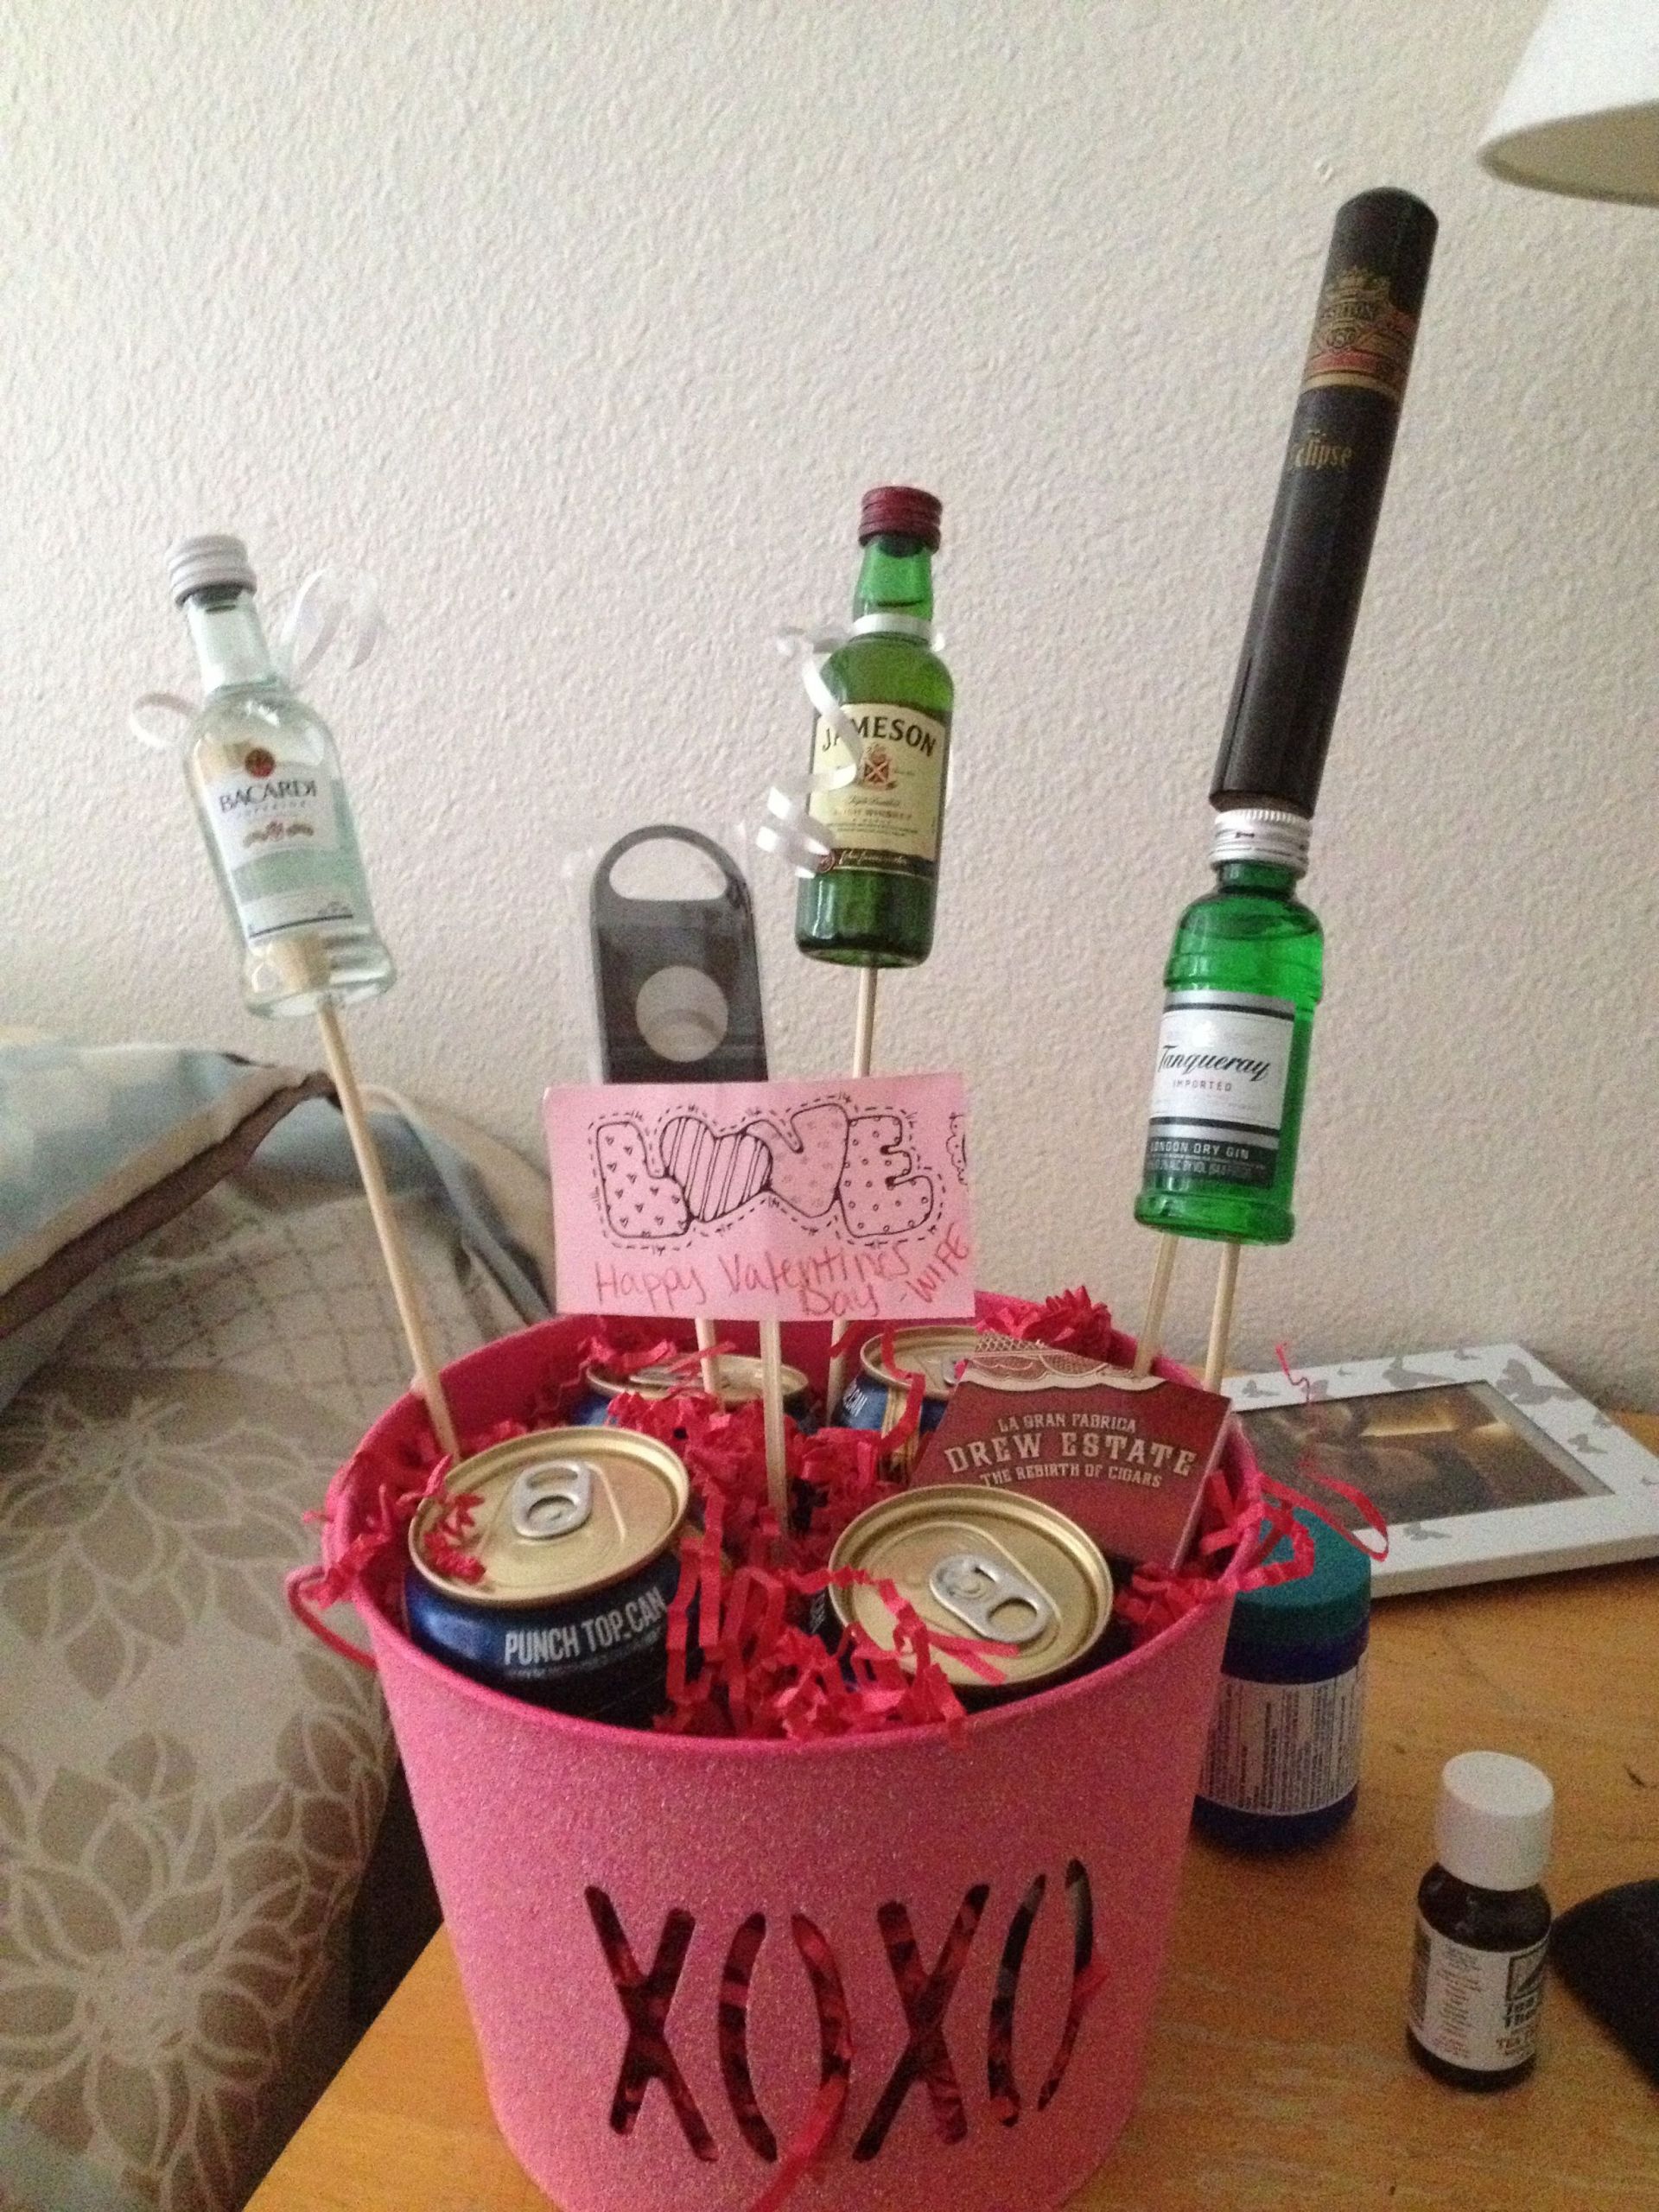 Husband Valentines Gift Ideas
 I would do this in Christmas a theme t for husband